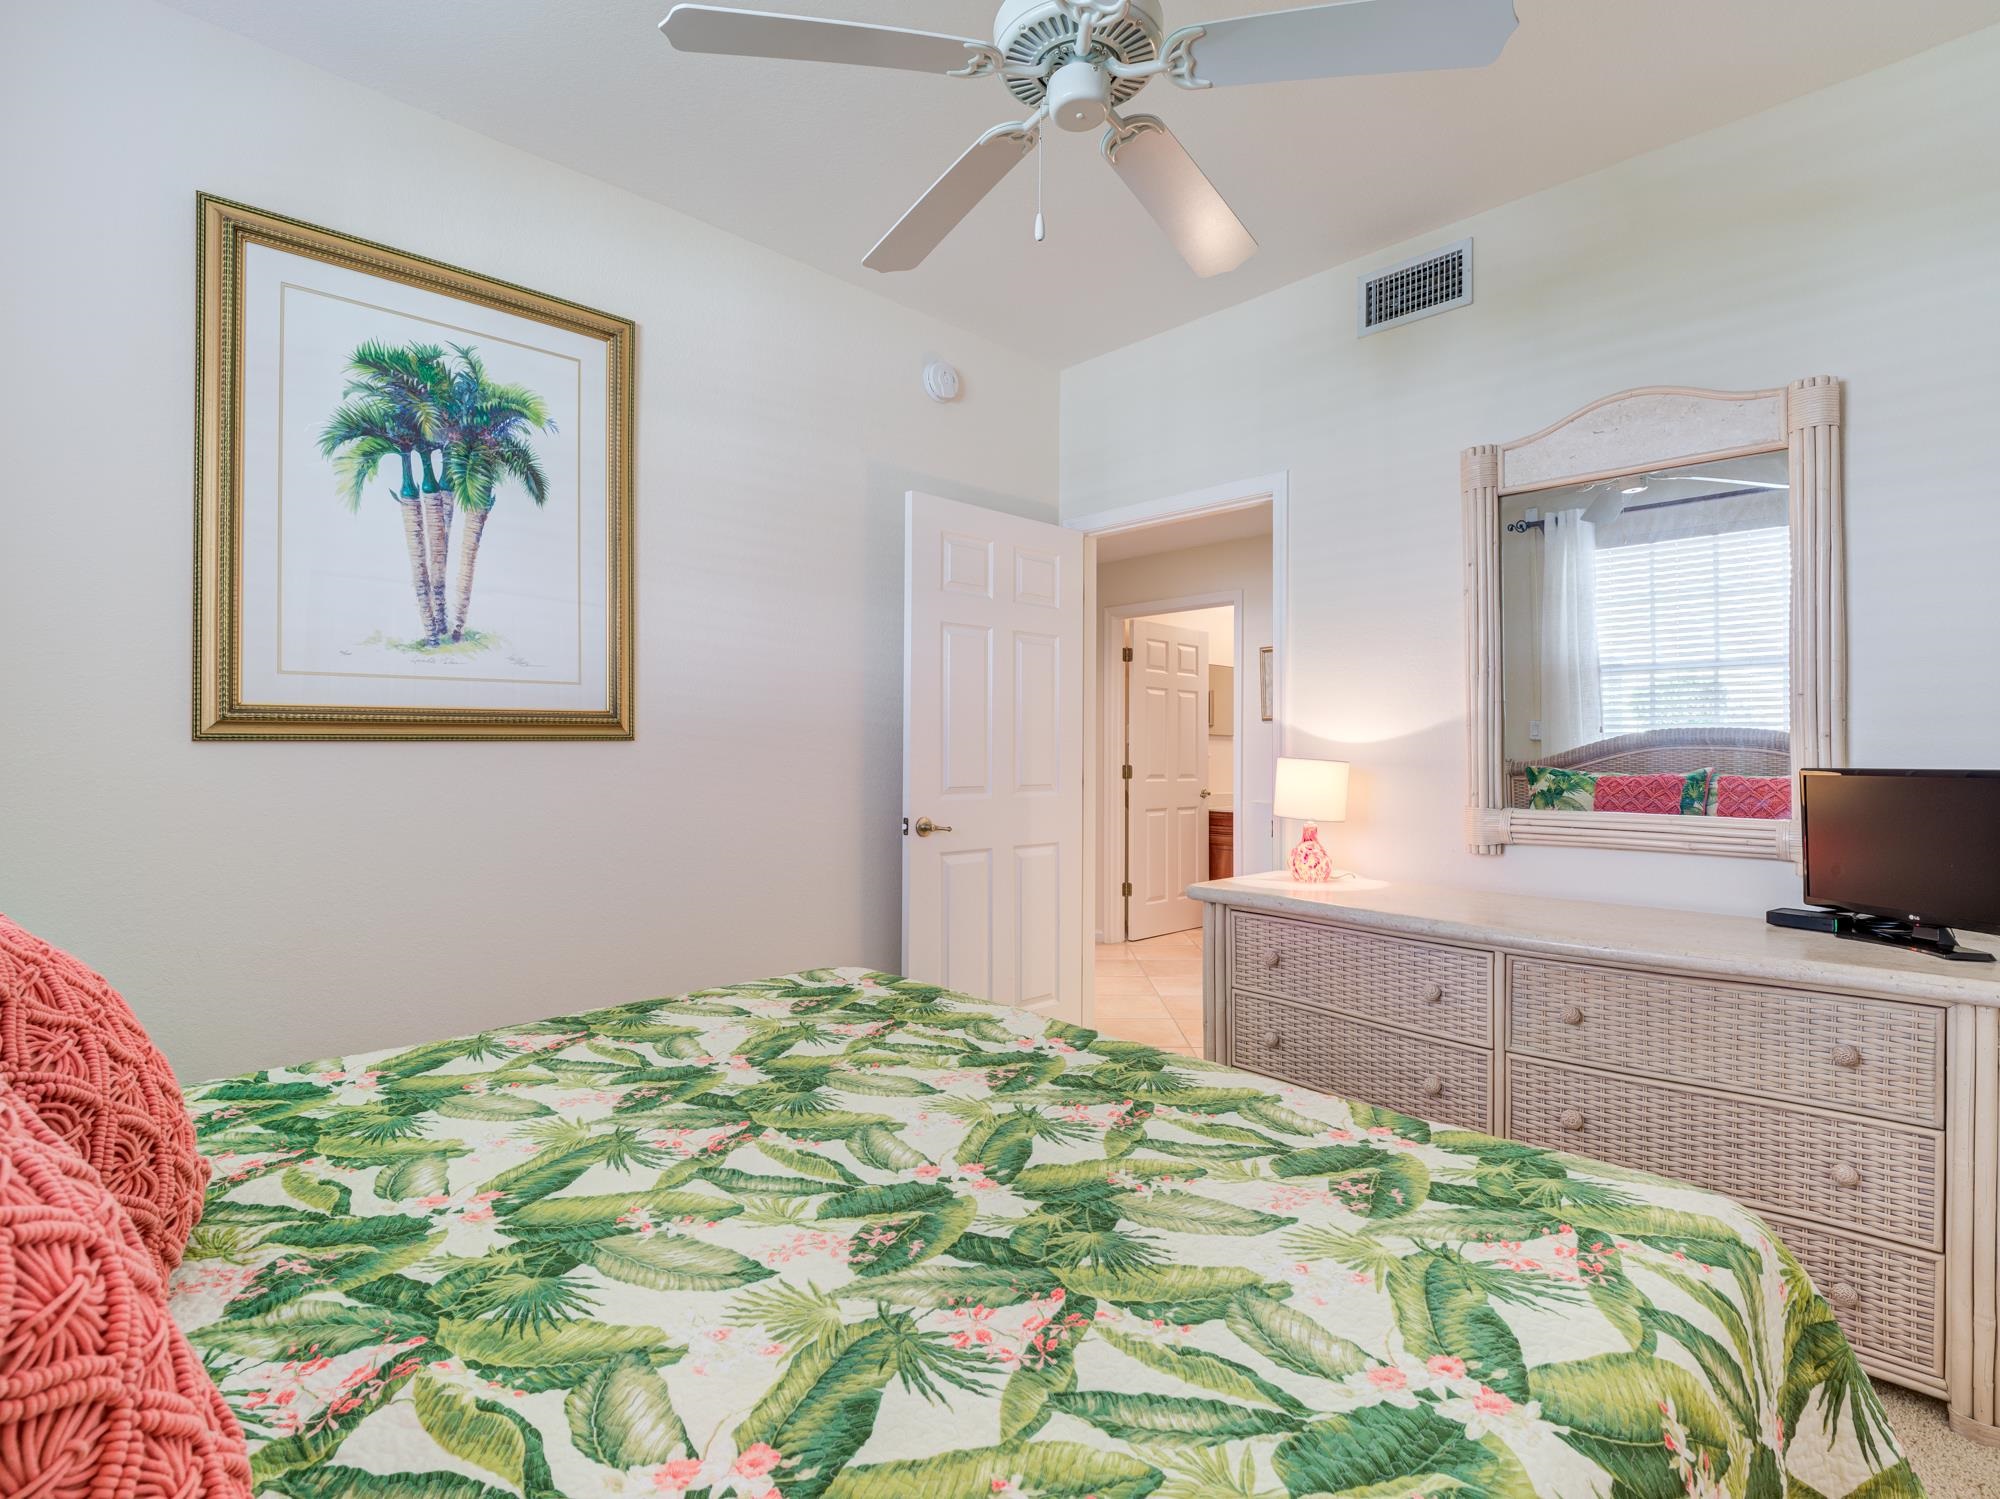 16125 Mount Abbey Way, Fort Myers, Florida 33908, 3 Bedrooms Bedrooms, ,2 BathroomsBathrooms,Condo,For Sale,Mount Abbey Way,2231017